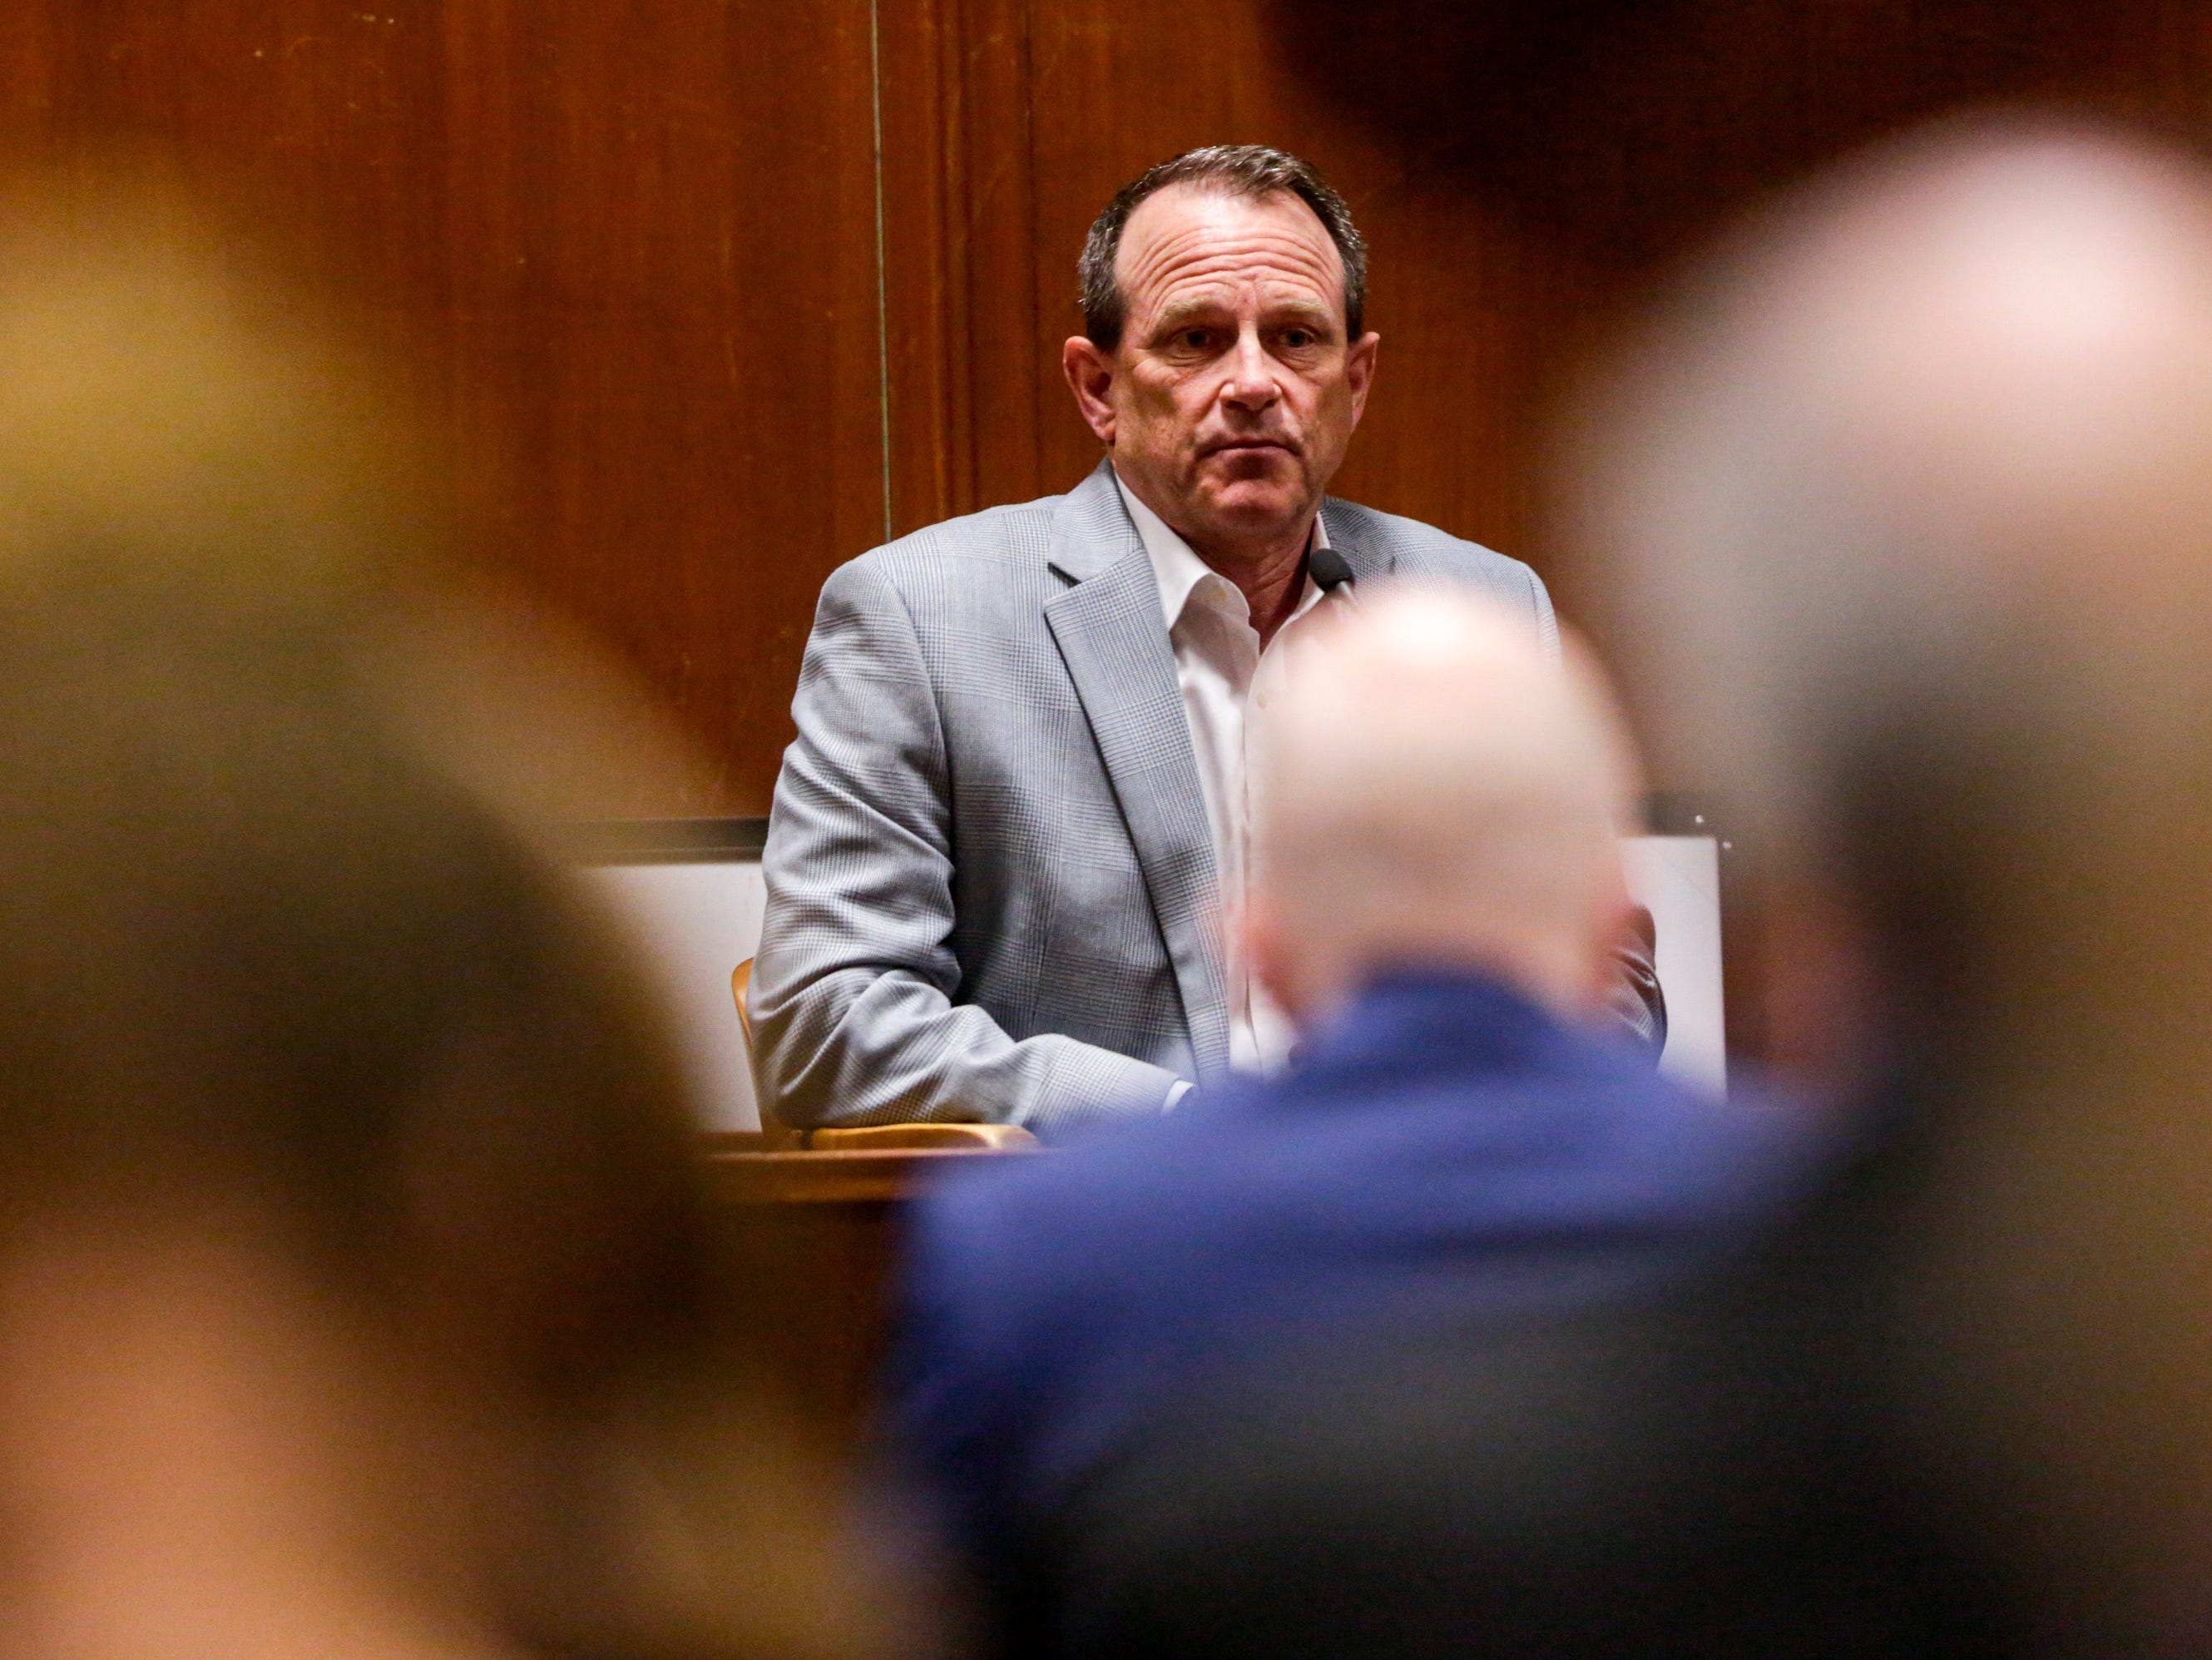 Todd Bergen, of Cedar Rapids, testifies during the trial of Jerry Burns at the Scott County Courthouse in Davenport on Wednesday, Feb. 12, 2020. Bergen attended Kennedy High School with Michelle Martinko, and ran into her at the Westdale Mall the night she was killed.